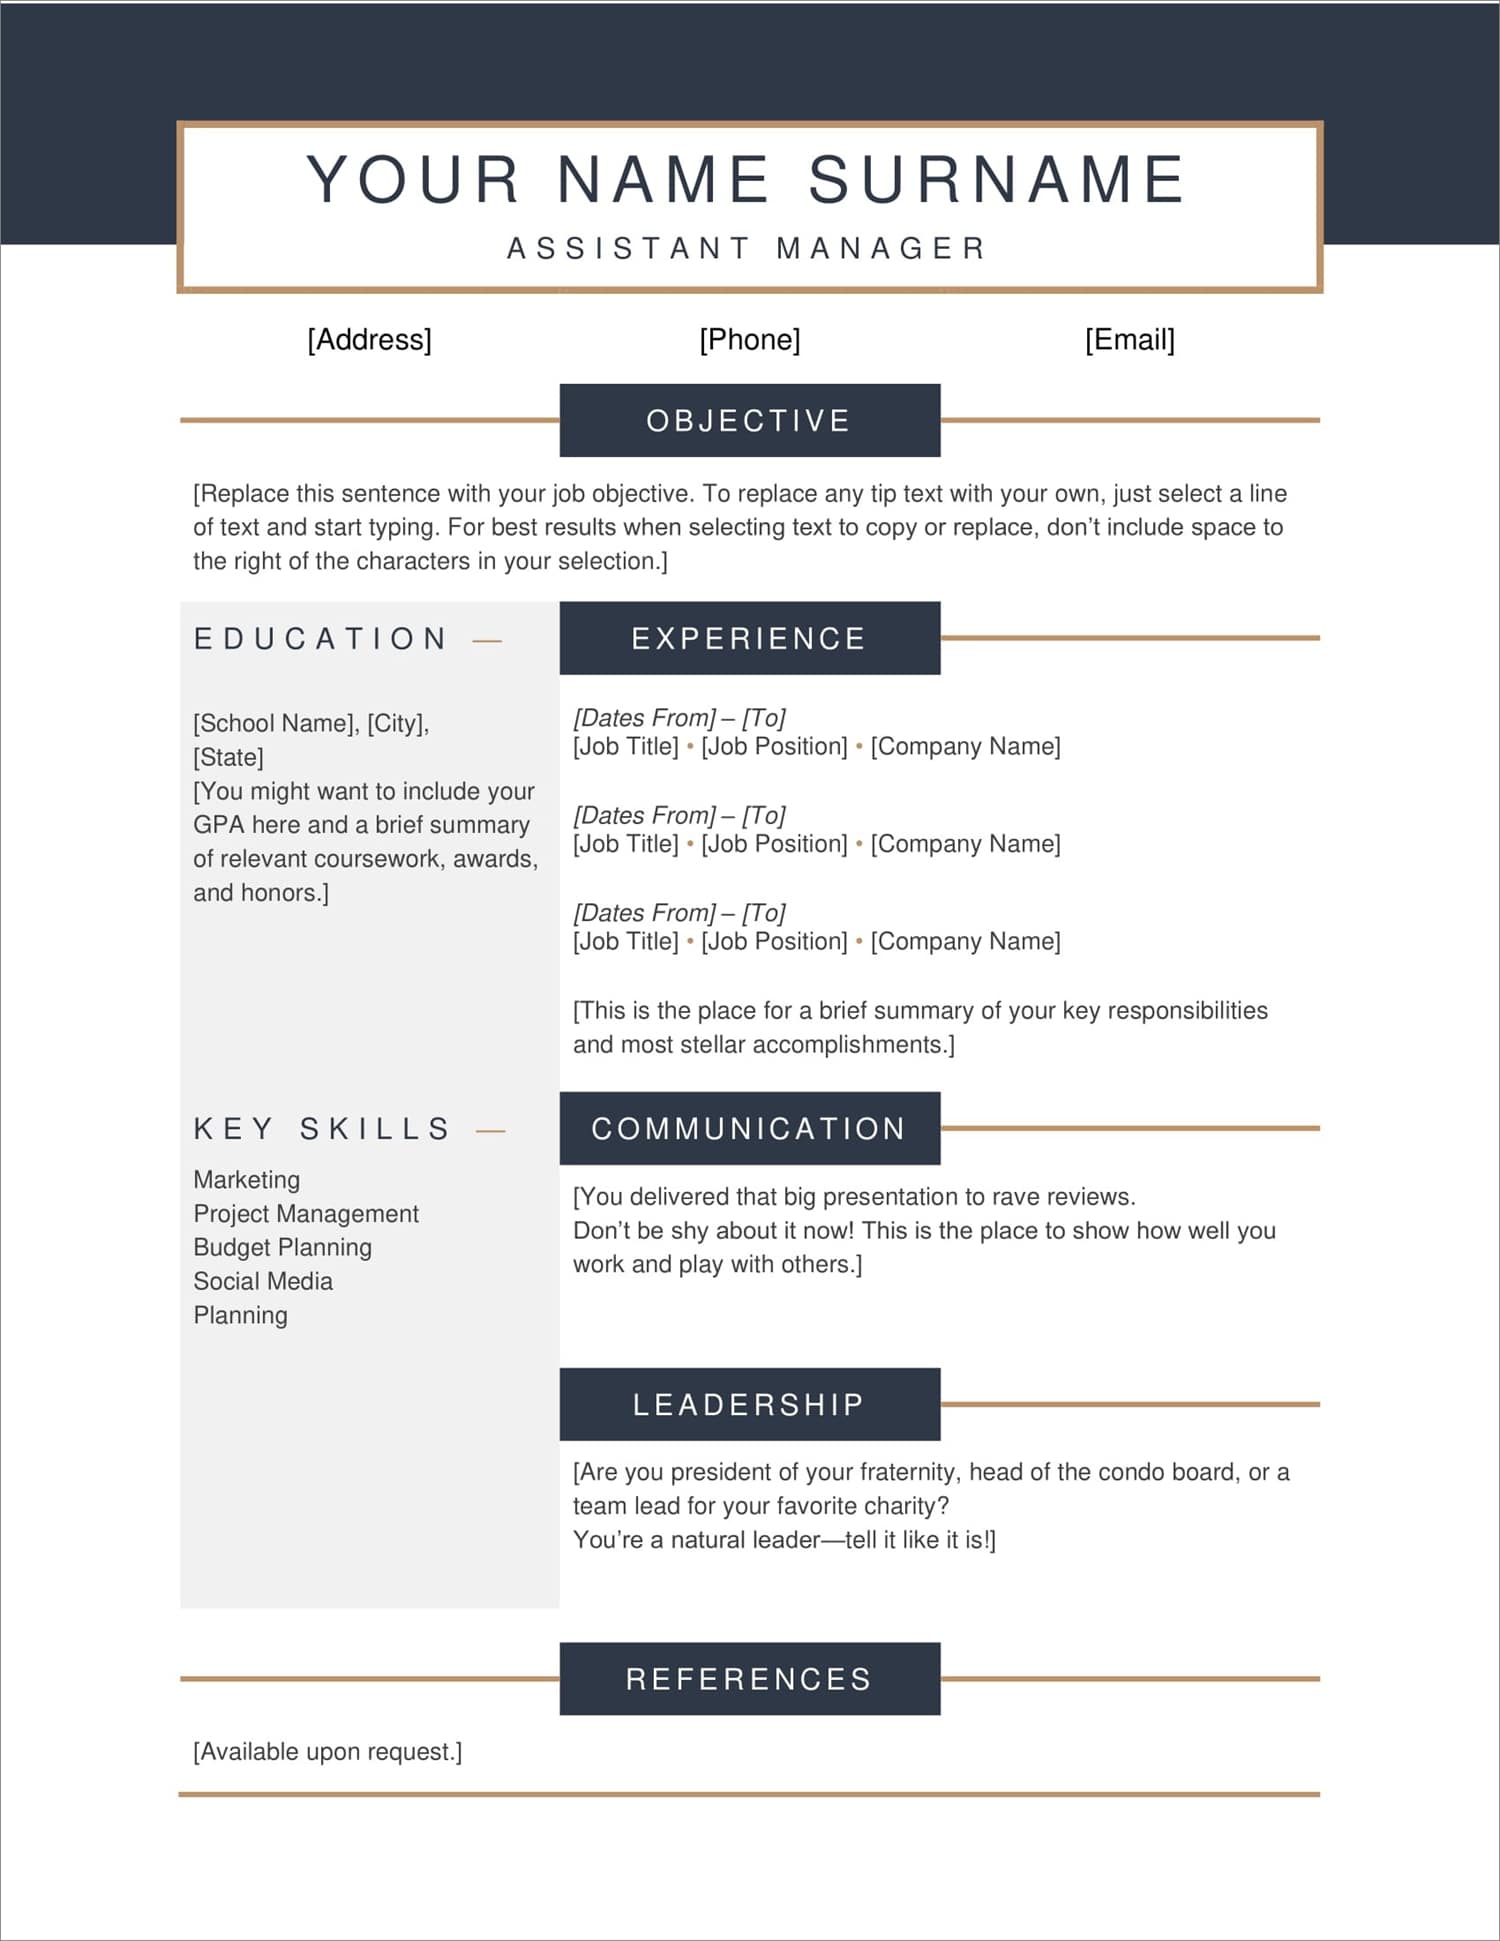 Free Professional Resume from cdn-images.zety.com